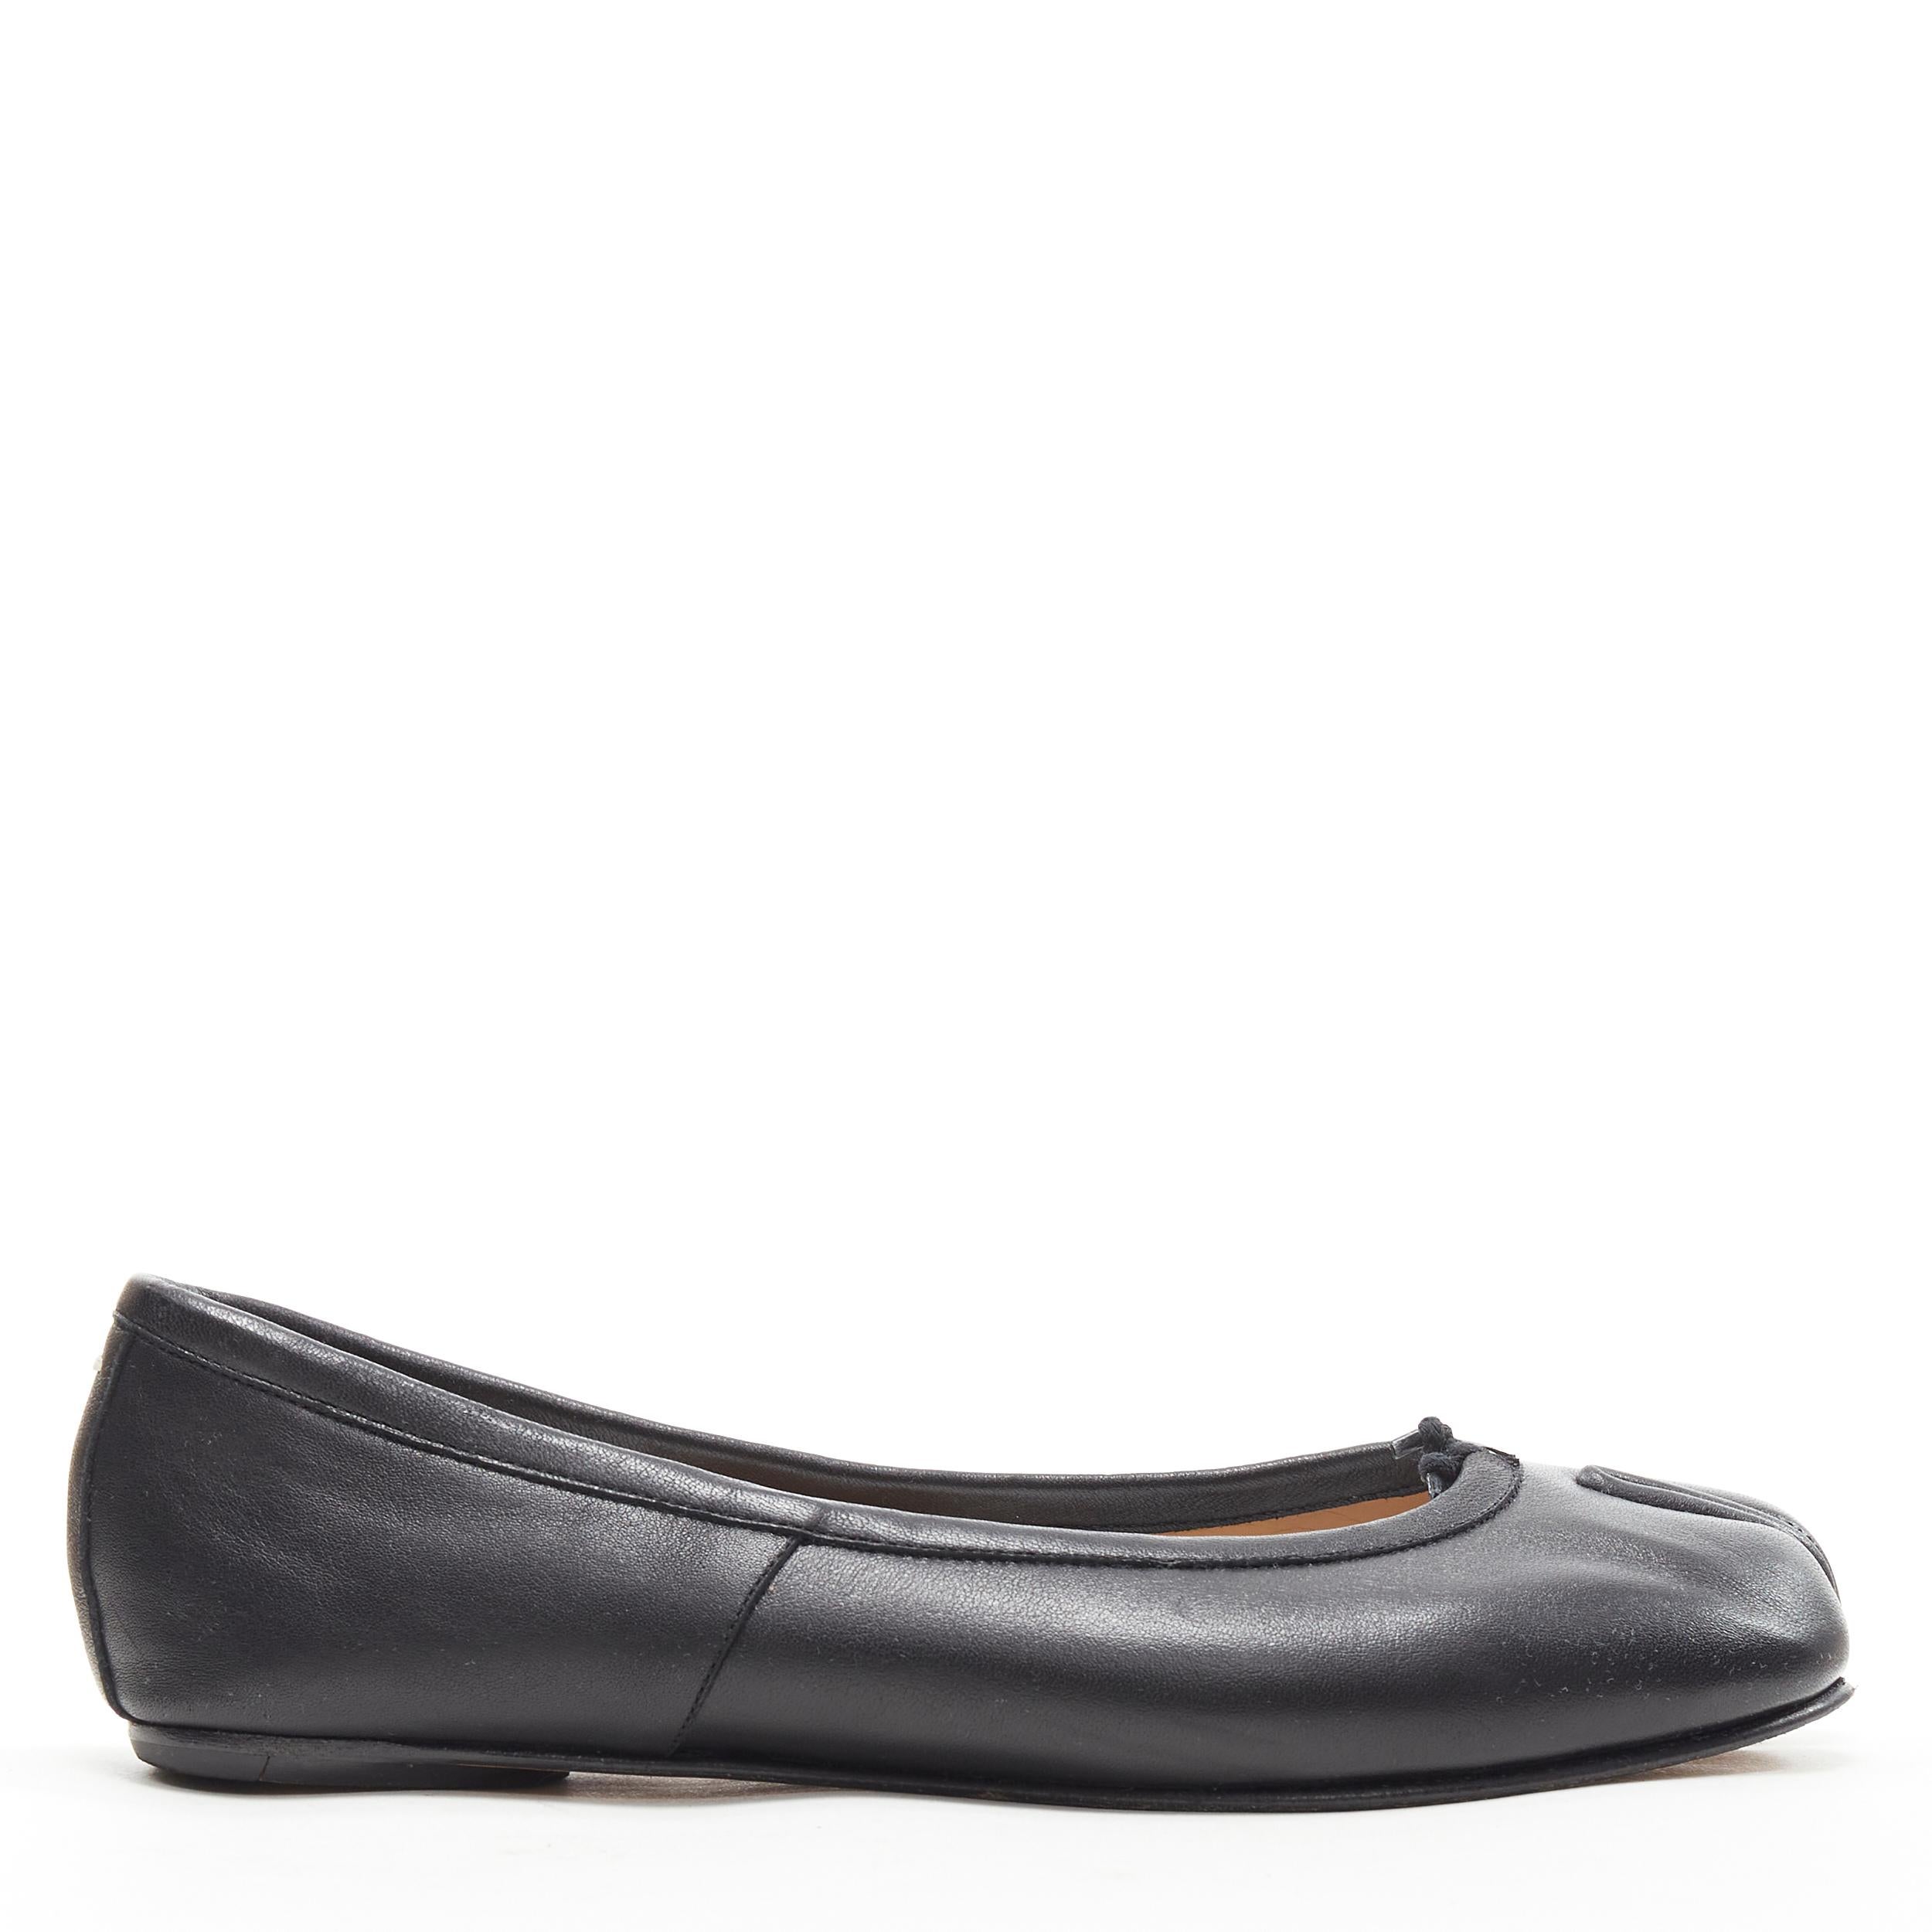 MAISON MARGIELA Tabi black leather split toe ballerina flats EU37 
Reference: LNKO/A01779 
Brand: Maison Margiela 
Model: Tabi flats 
Material: Leather 
Color: Black 
Pattern: Solid 
Made in: Italy 

CONDITION: 
Condition: Excellent, this item was